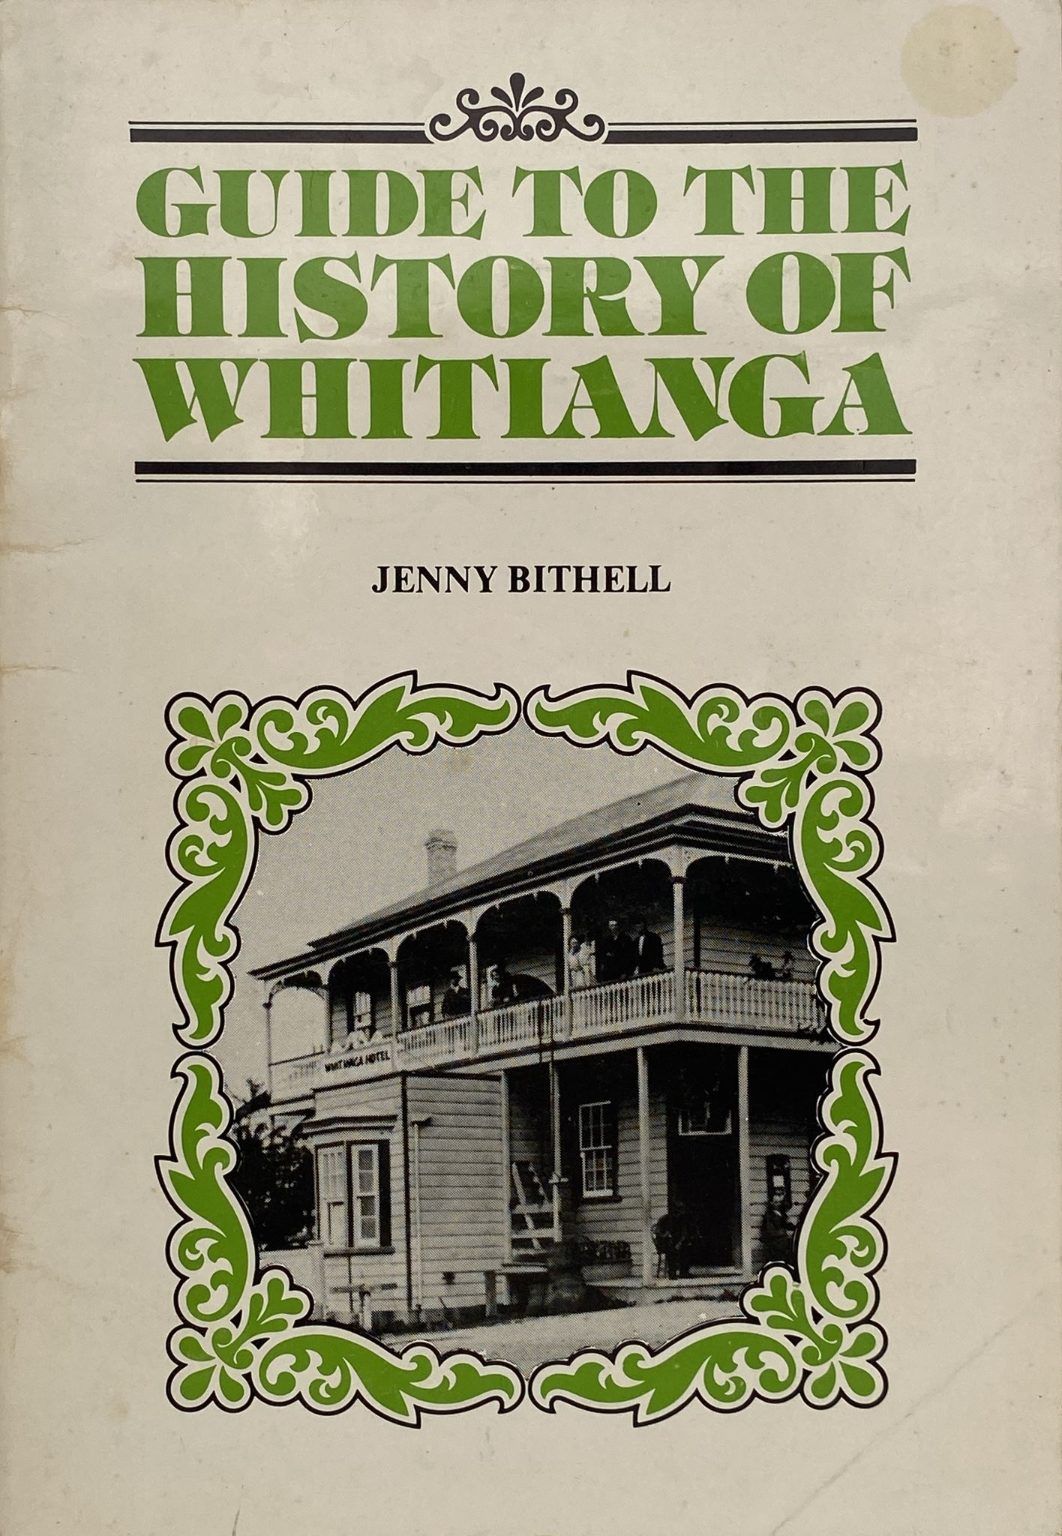 GUIDE TO THE HISTORY OF WHITIANGA